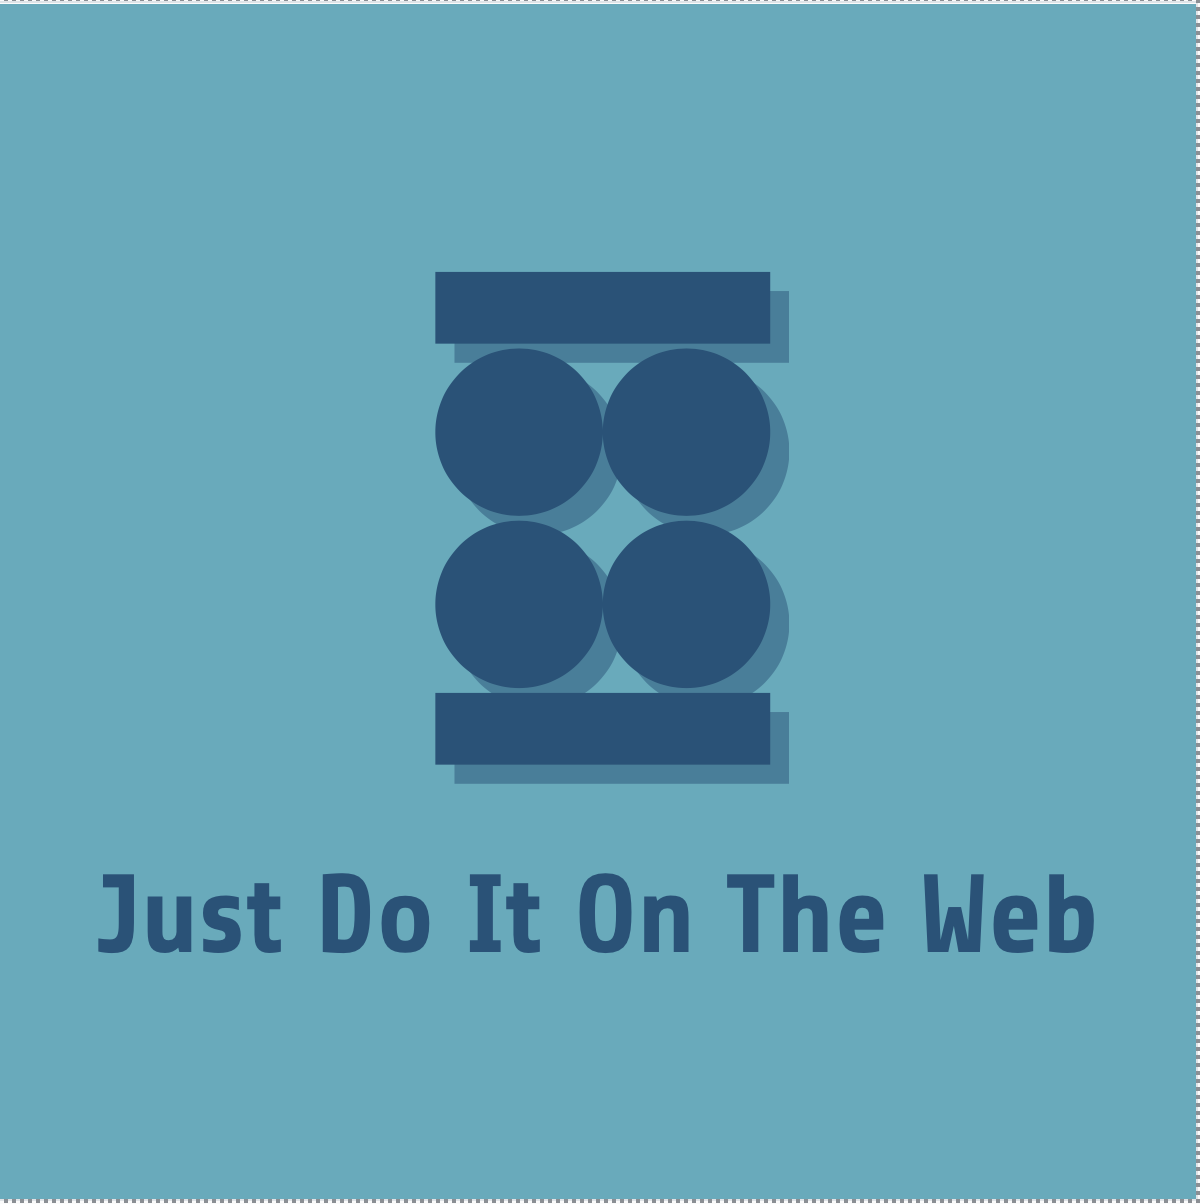 Just Do It On The Web